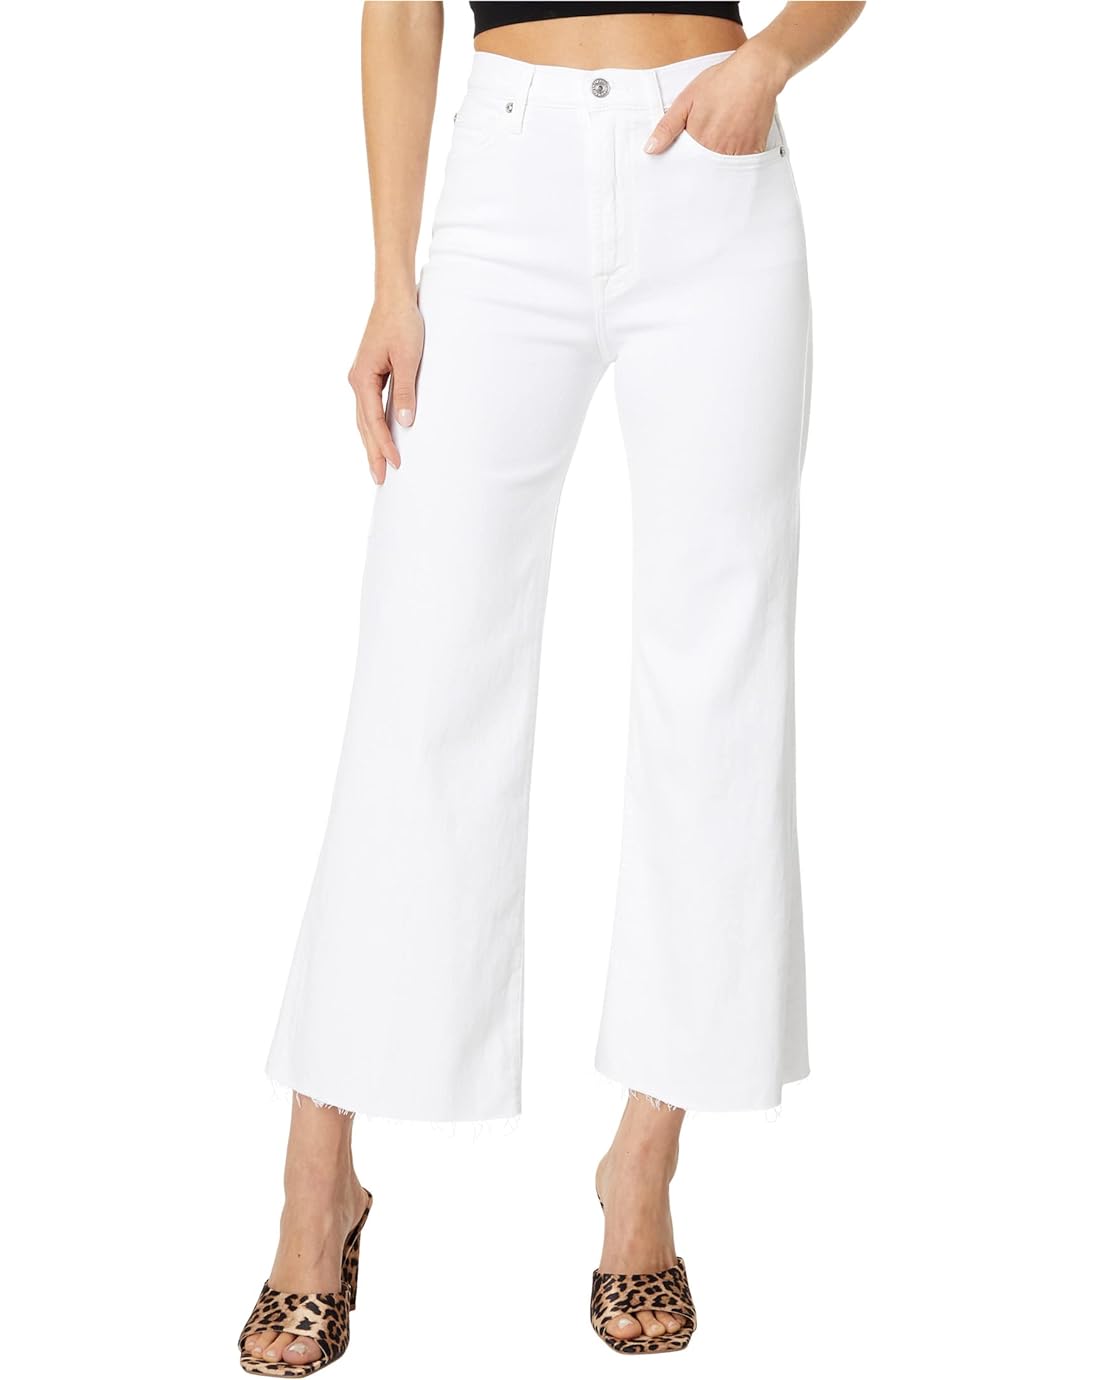 7 For All Mankind Ultra High-Rise Cropped Jo in Luxe Vintage Soleil